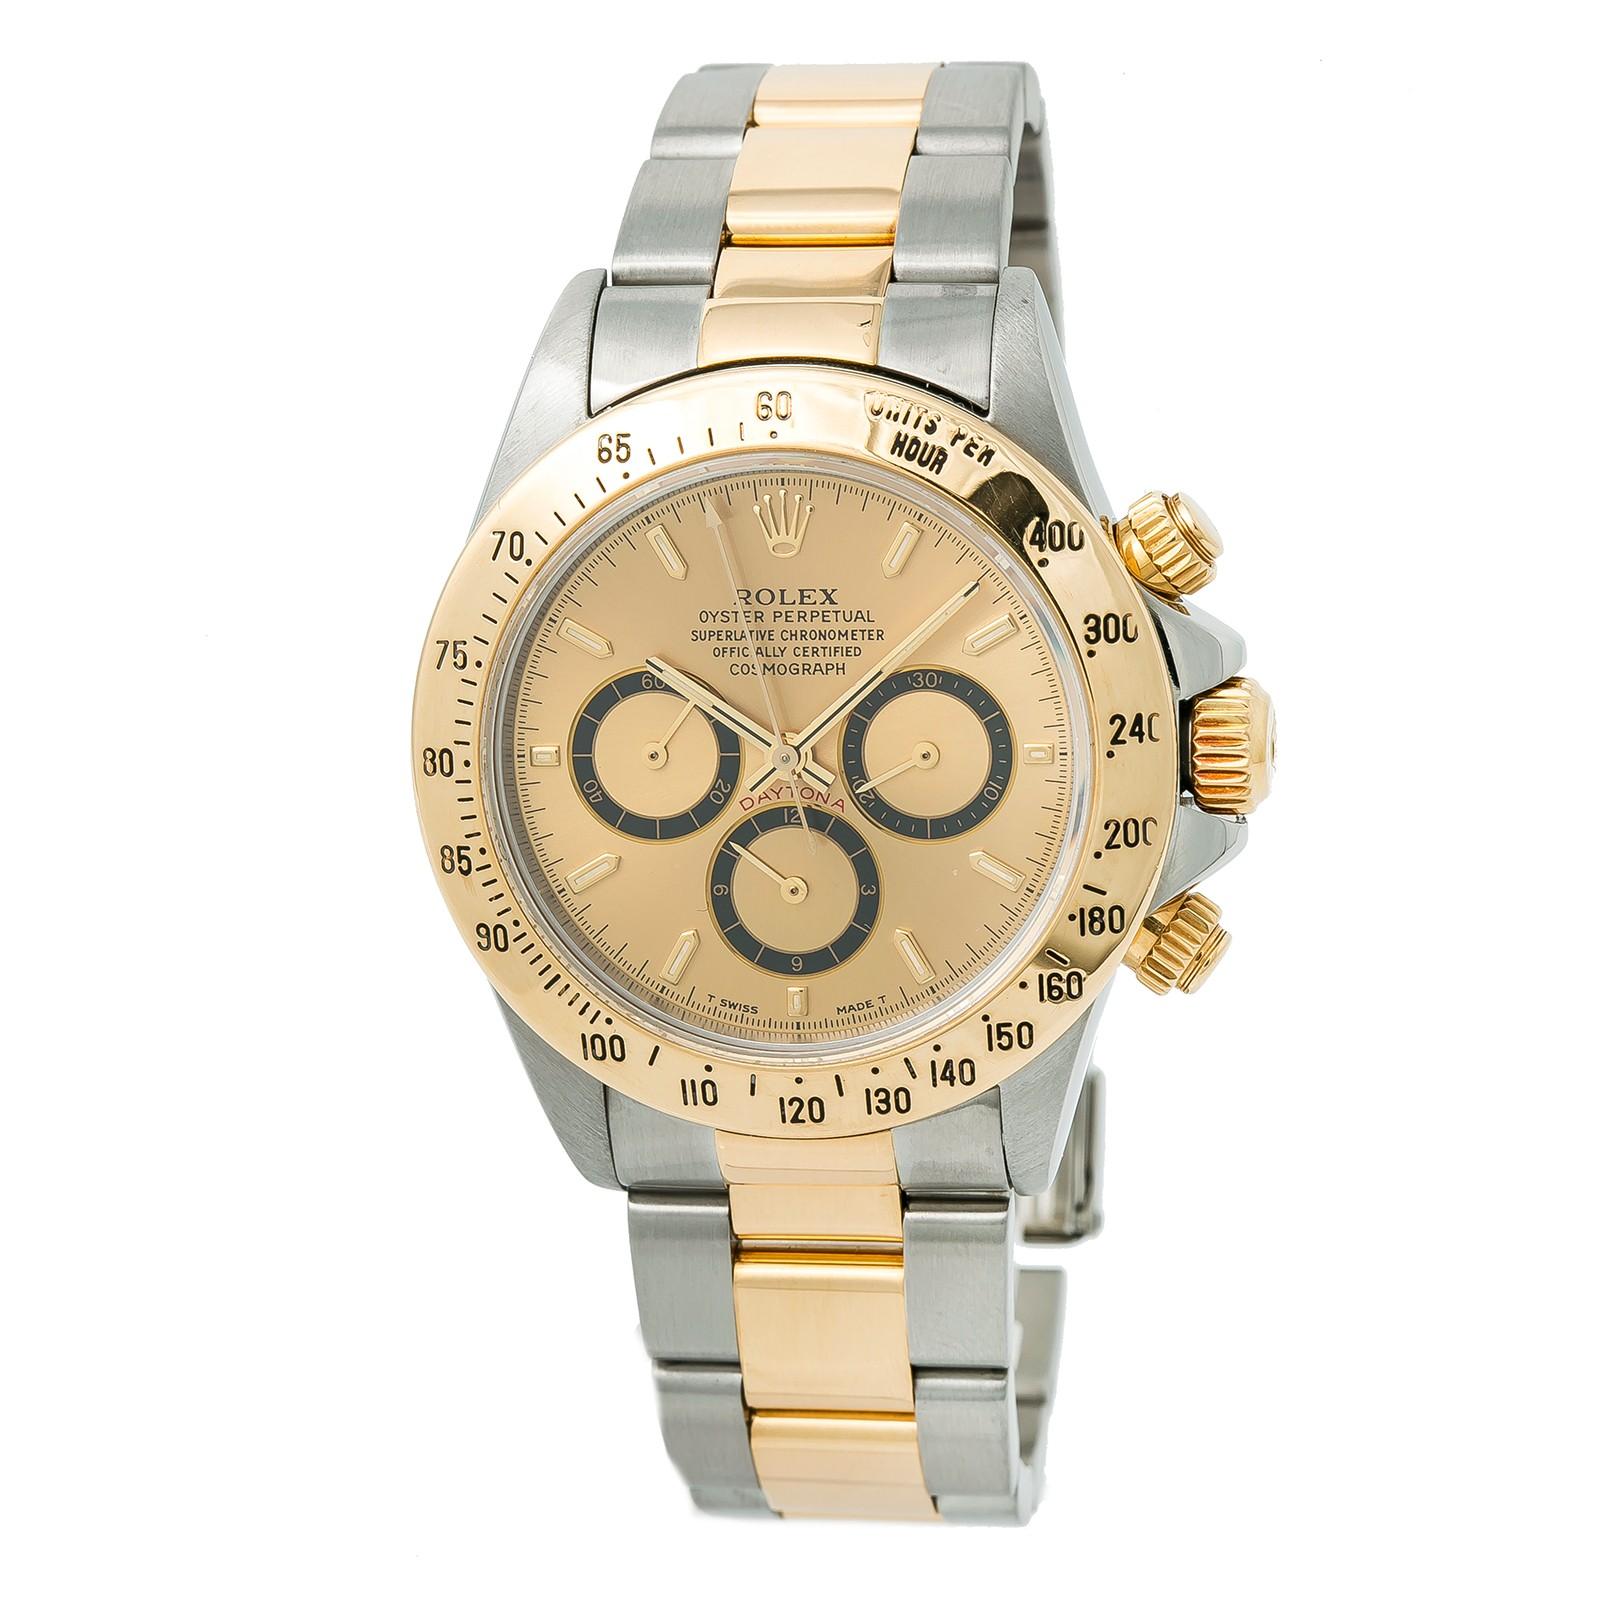 Certified Rolex Daytona Zenith Inverted 6 16523 Men’s Automatic Watch For Sale